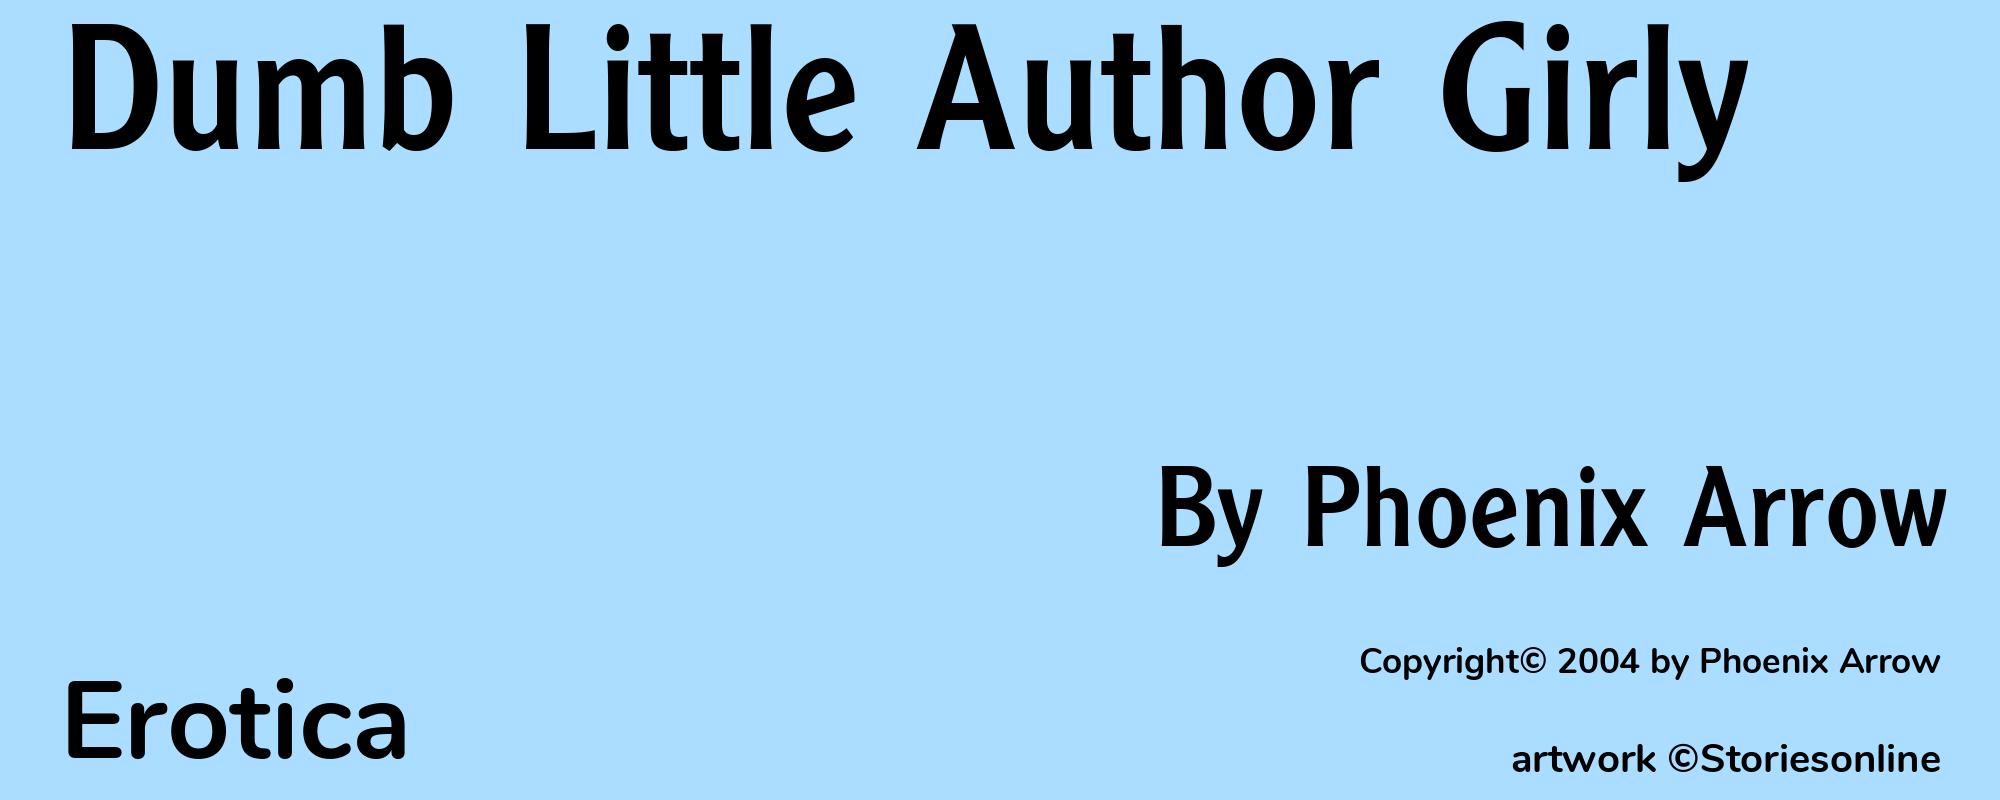 Dumb Little Author Girly - Cover